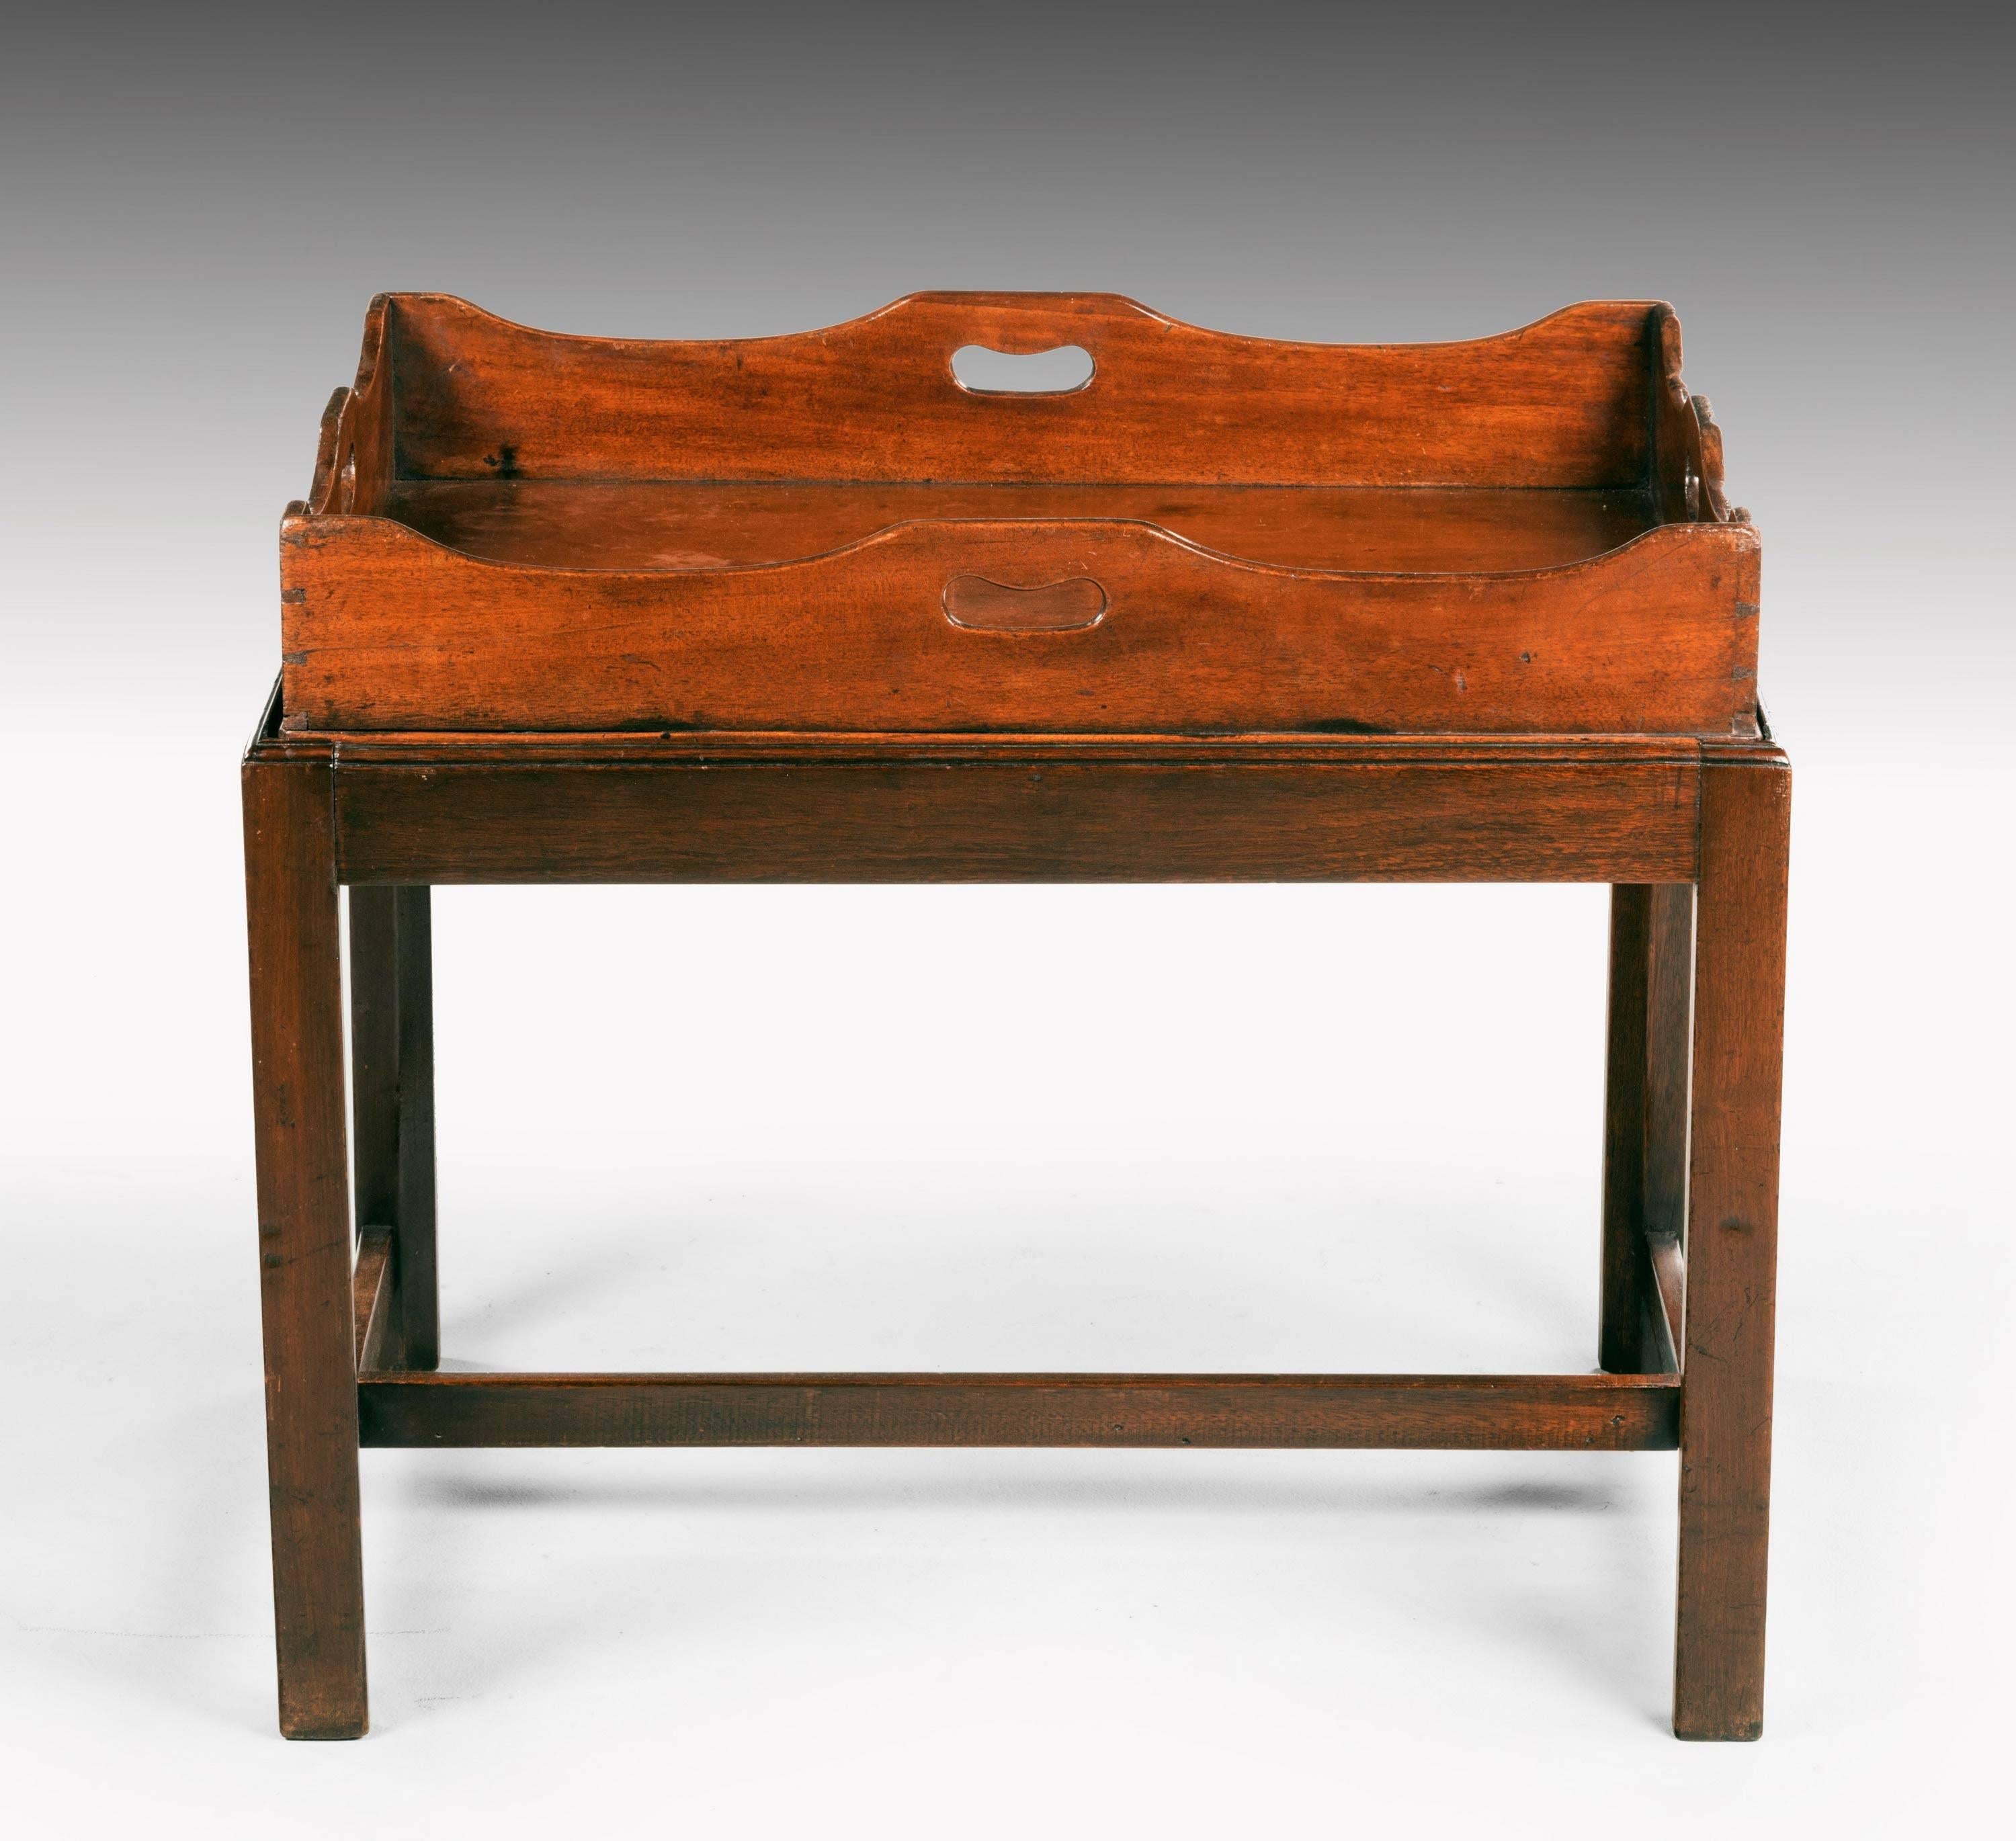 English George III Period Mahogany Tray with a Shaped and Swept Border